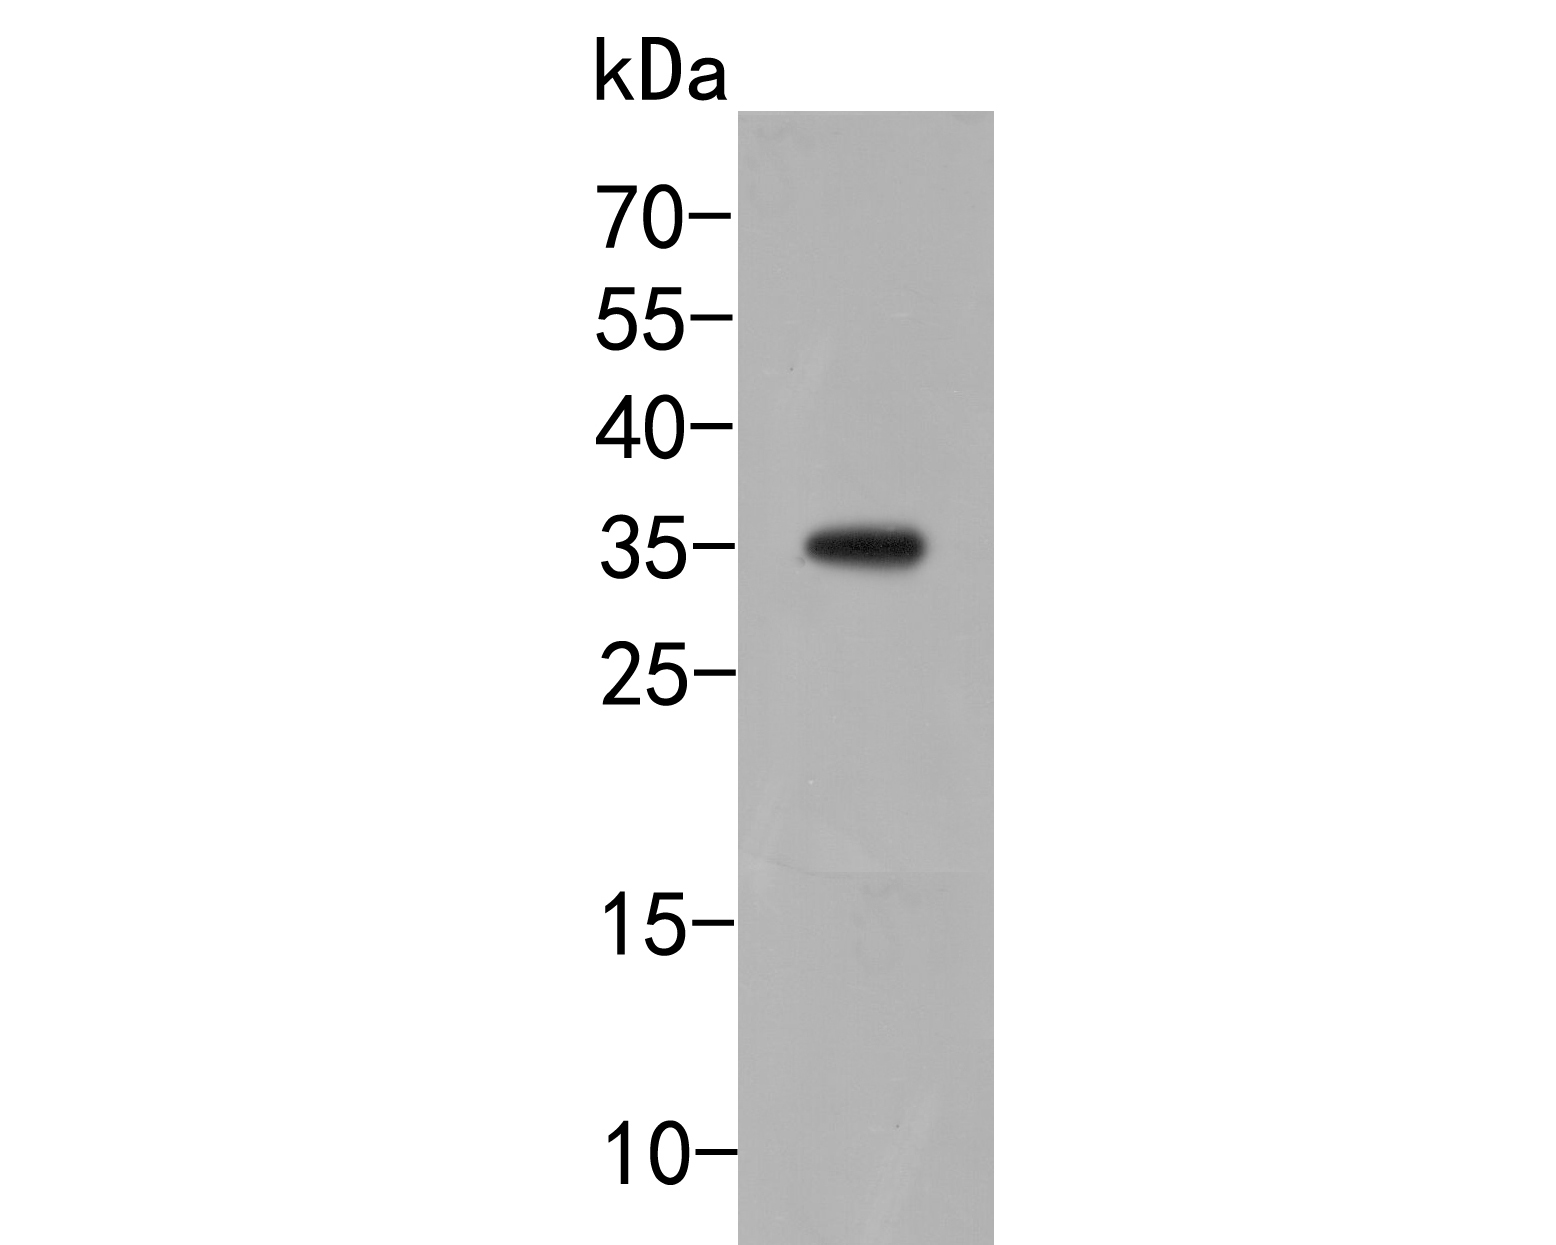 Western blot analysis of TMEM119 on SHSY5Y cell lysate. Proteins were transferred to a PVDF membrane and blocked with 5% BSA in PBS for 1 hour at room temperature. The primary antibody (ER2001-37, 1/500) was used in 5% BSA at room temperature for 2 hours. Goat Anti-Rabbit IgG - HRP Secondary Antibody (HA1001) at 1:5,000 dilution was used for 1 hour at room temperature.